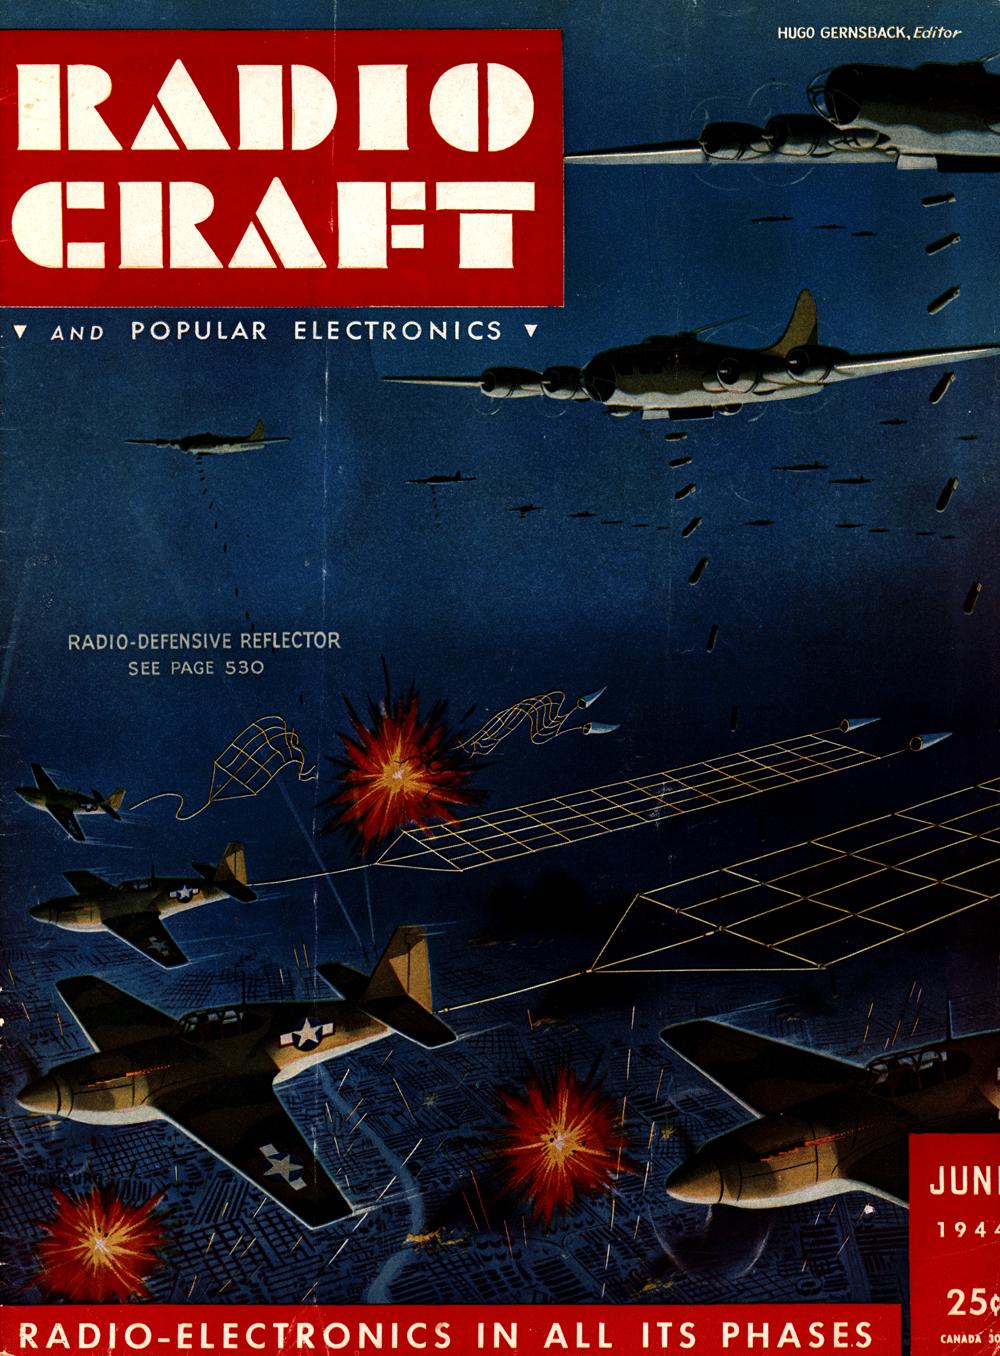 1944 - Radio-craft. and popular electronics; radio-electronics in all its phases - Vol. 15, No. 9